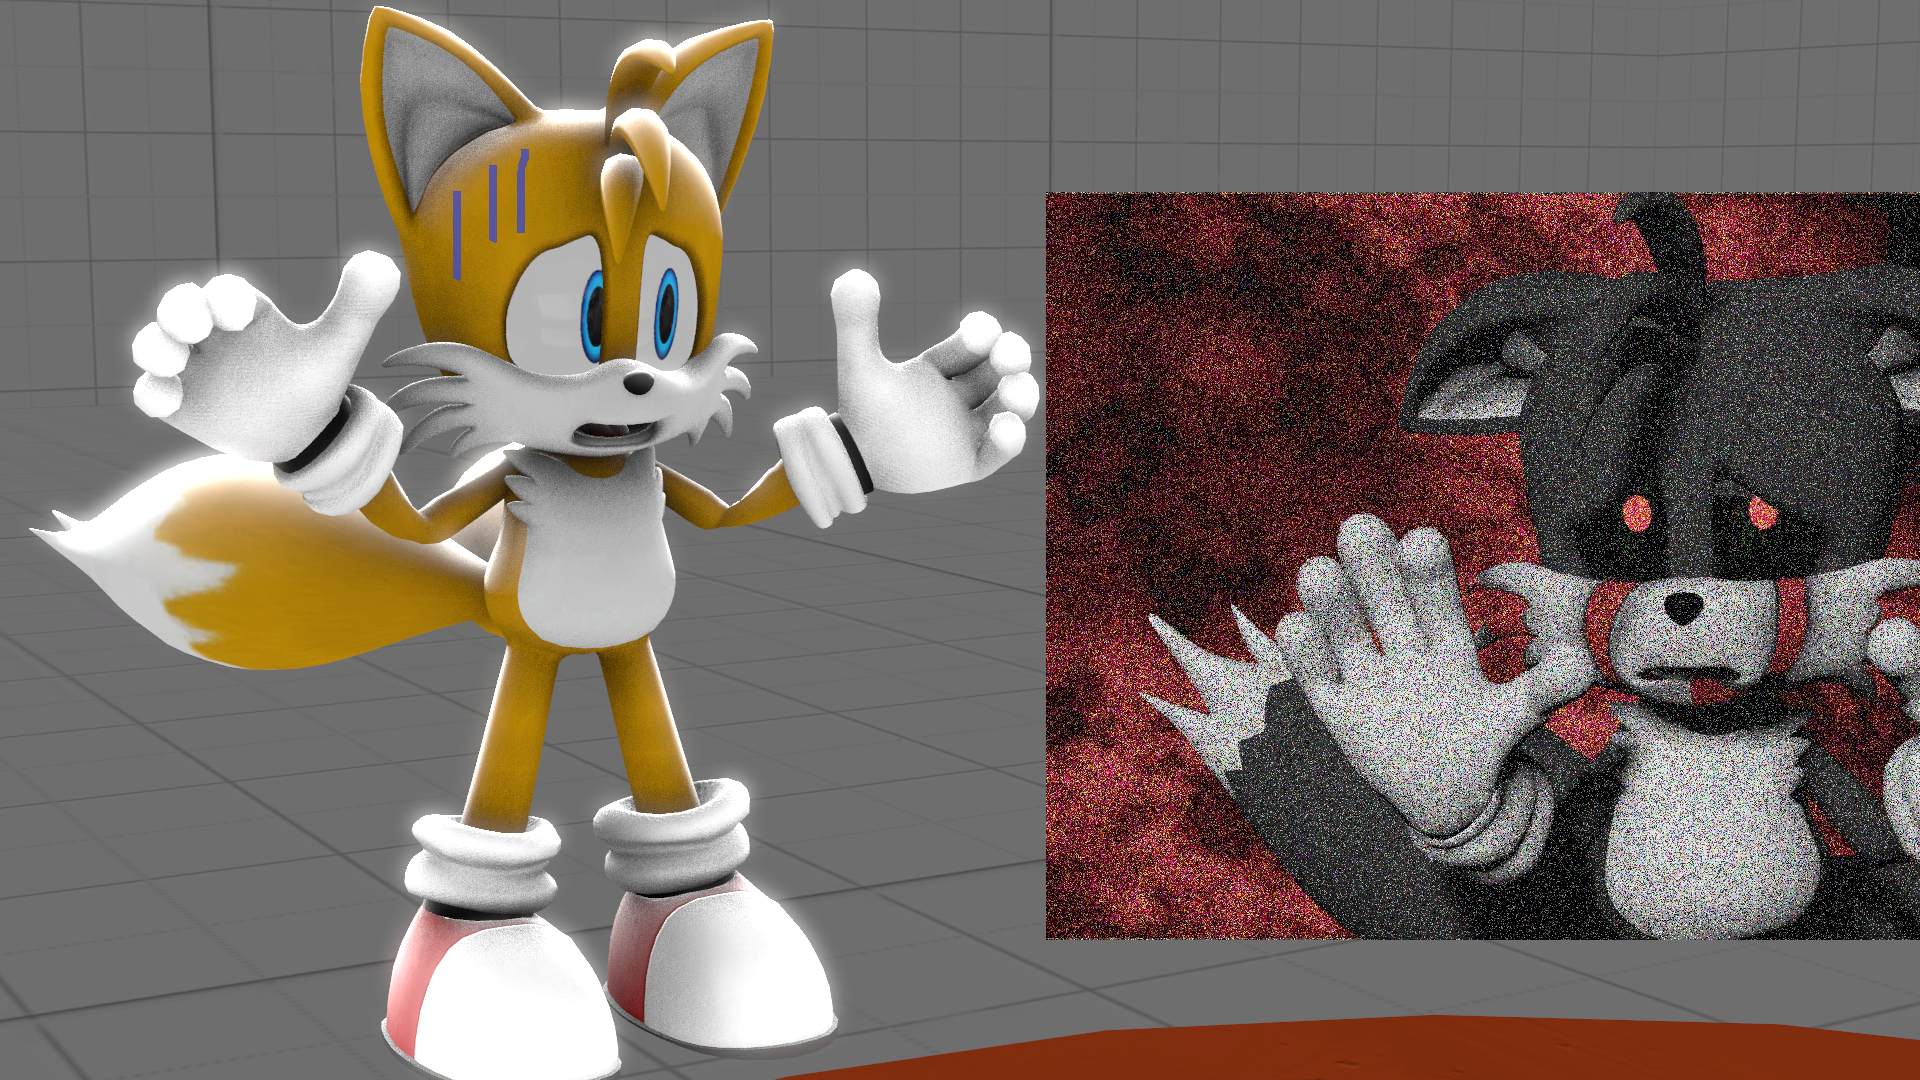 Tails.exe Jumpscare Render by S213413 on DeviantArt